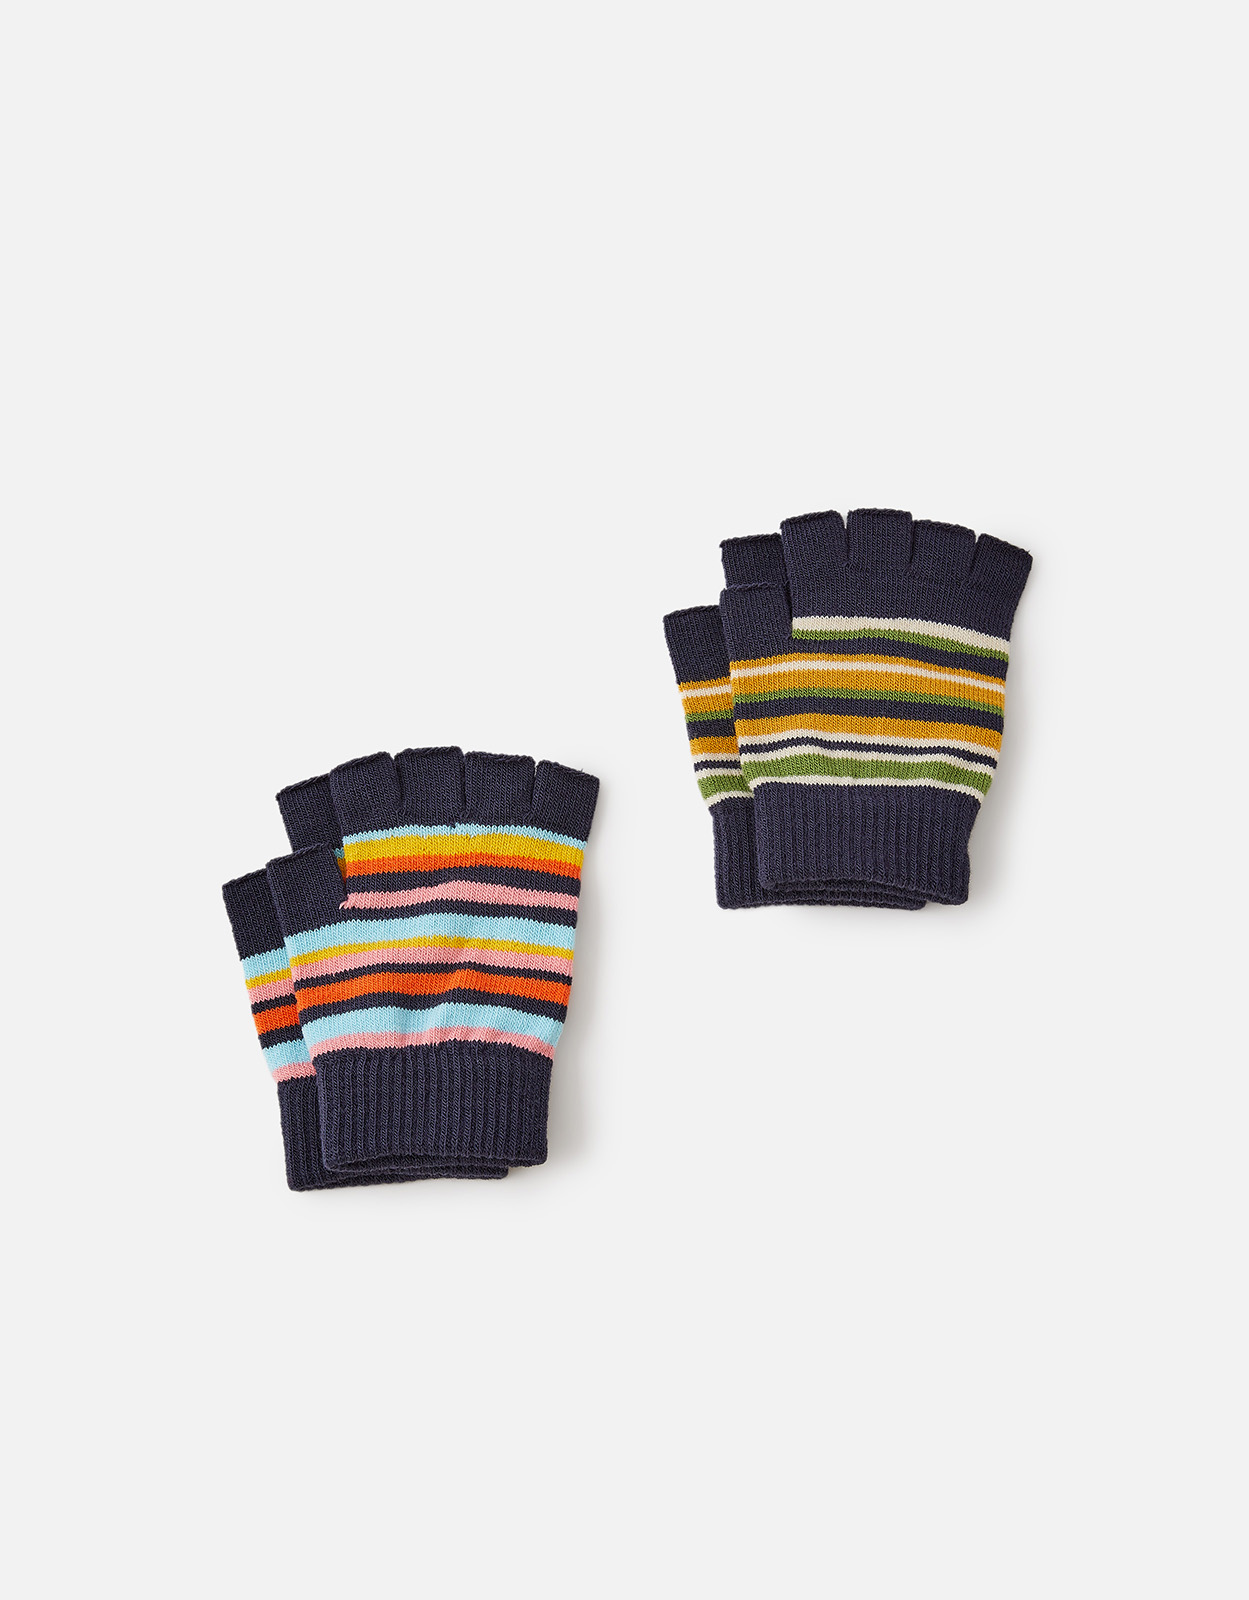 Accessorize Black Stripe Fingerless Gloves Set of Two, Size: One Size